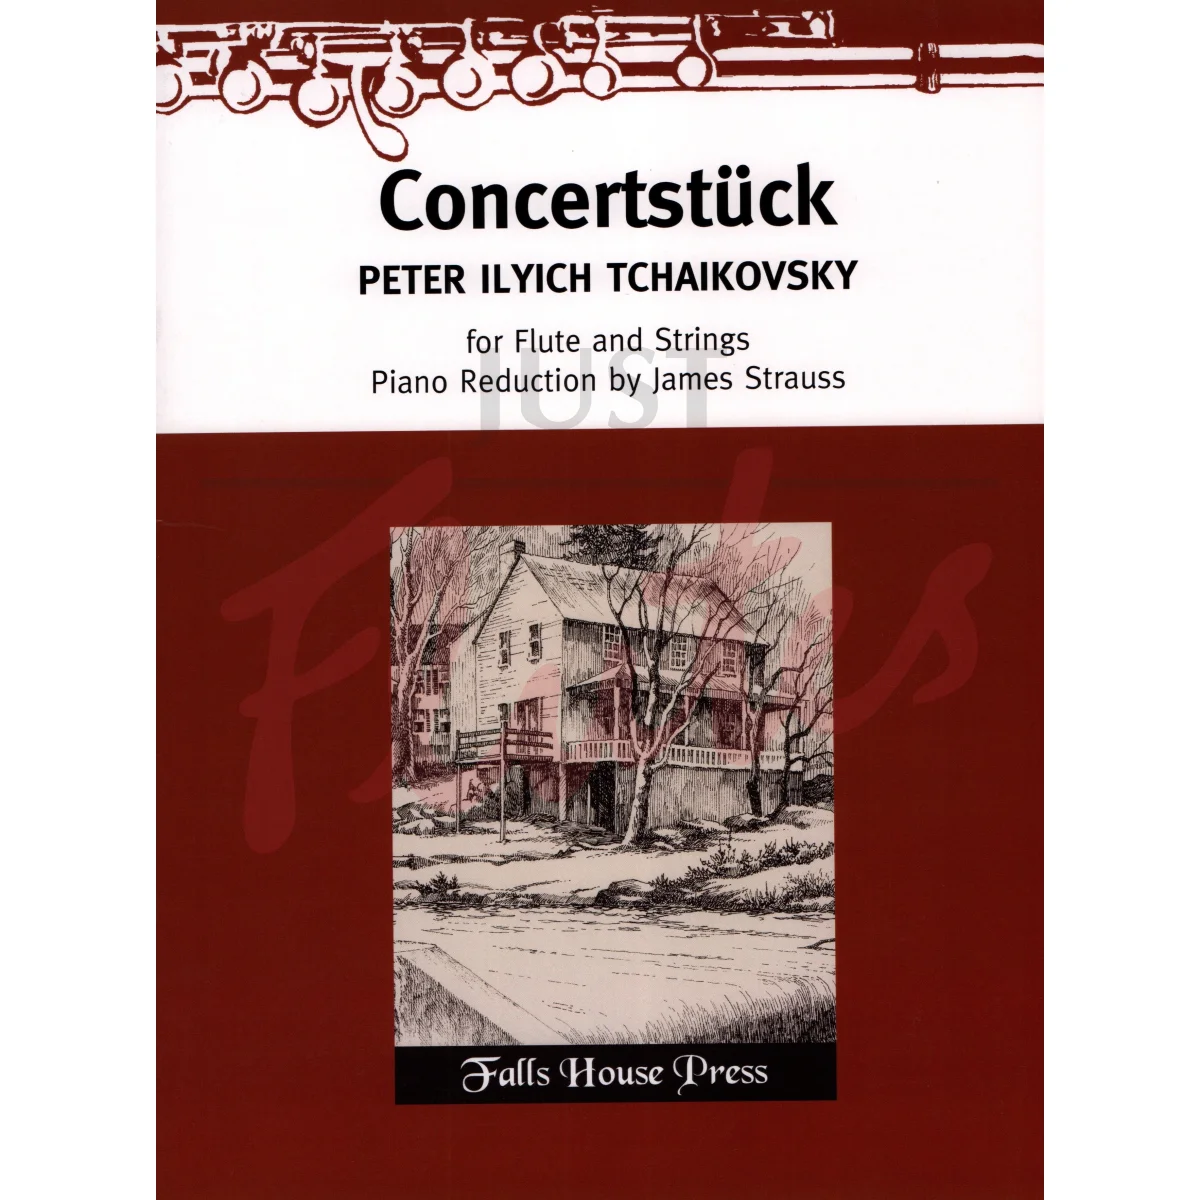 Concertstück arranged for Flute and Piano